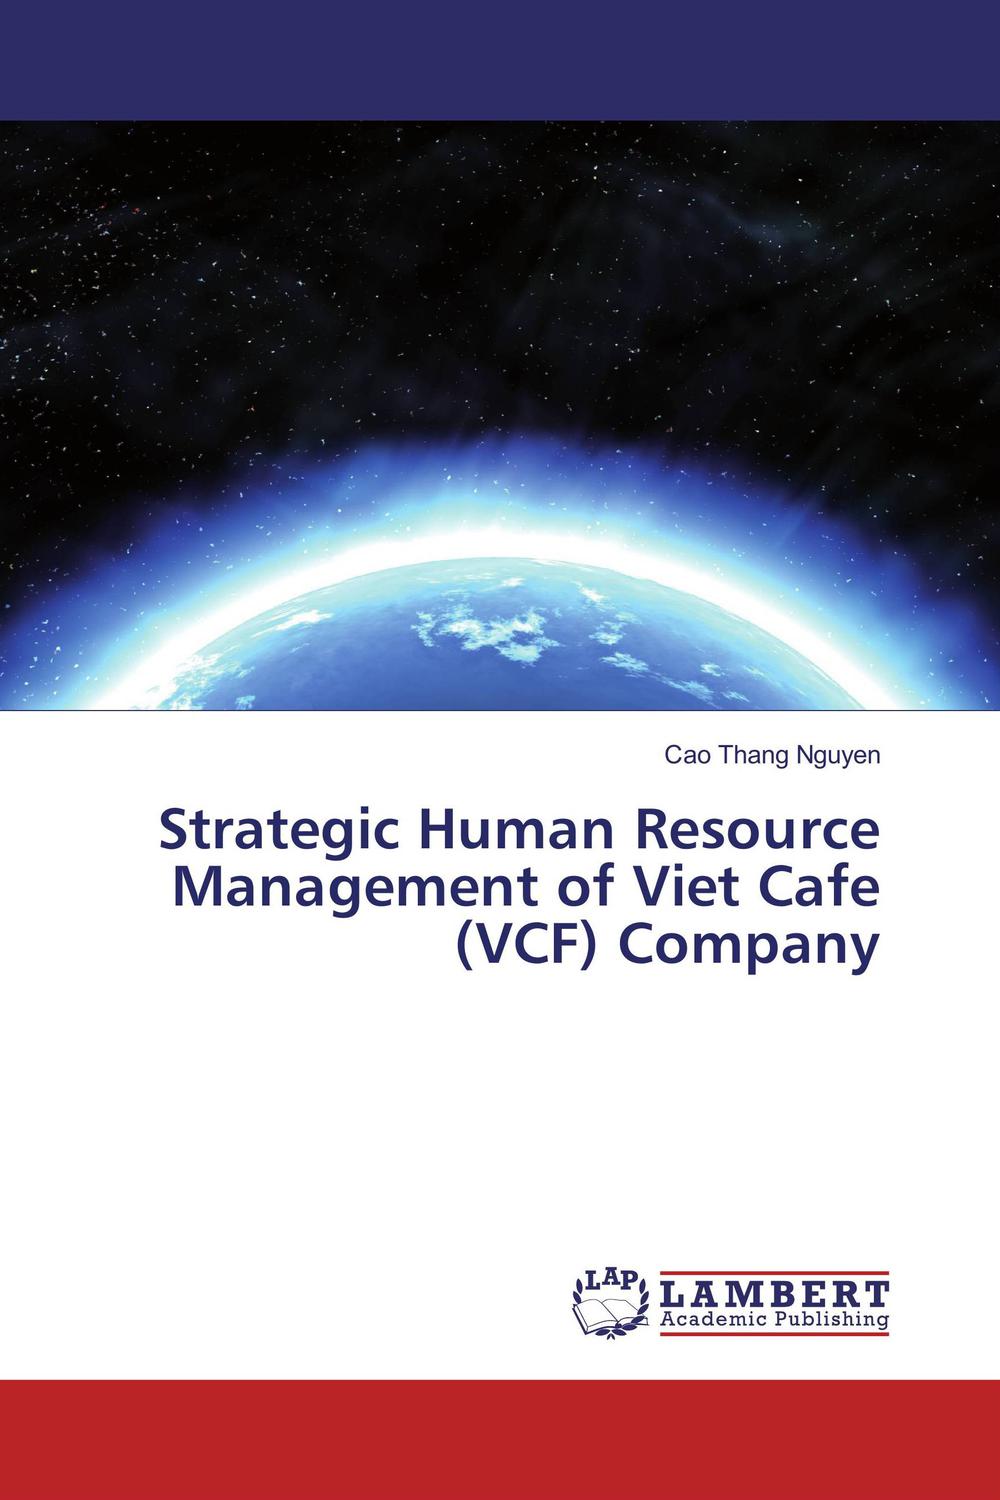 strategic human resource management of viet cafe company 1st edition nguyen, cao thang 6202067624,